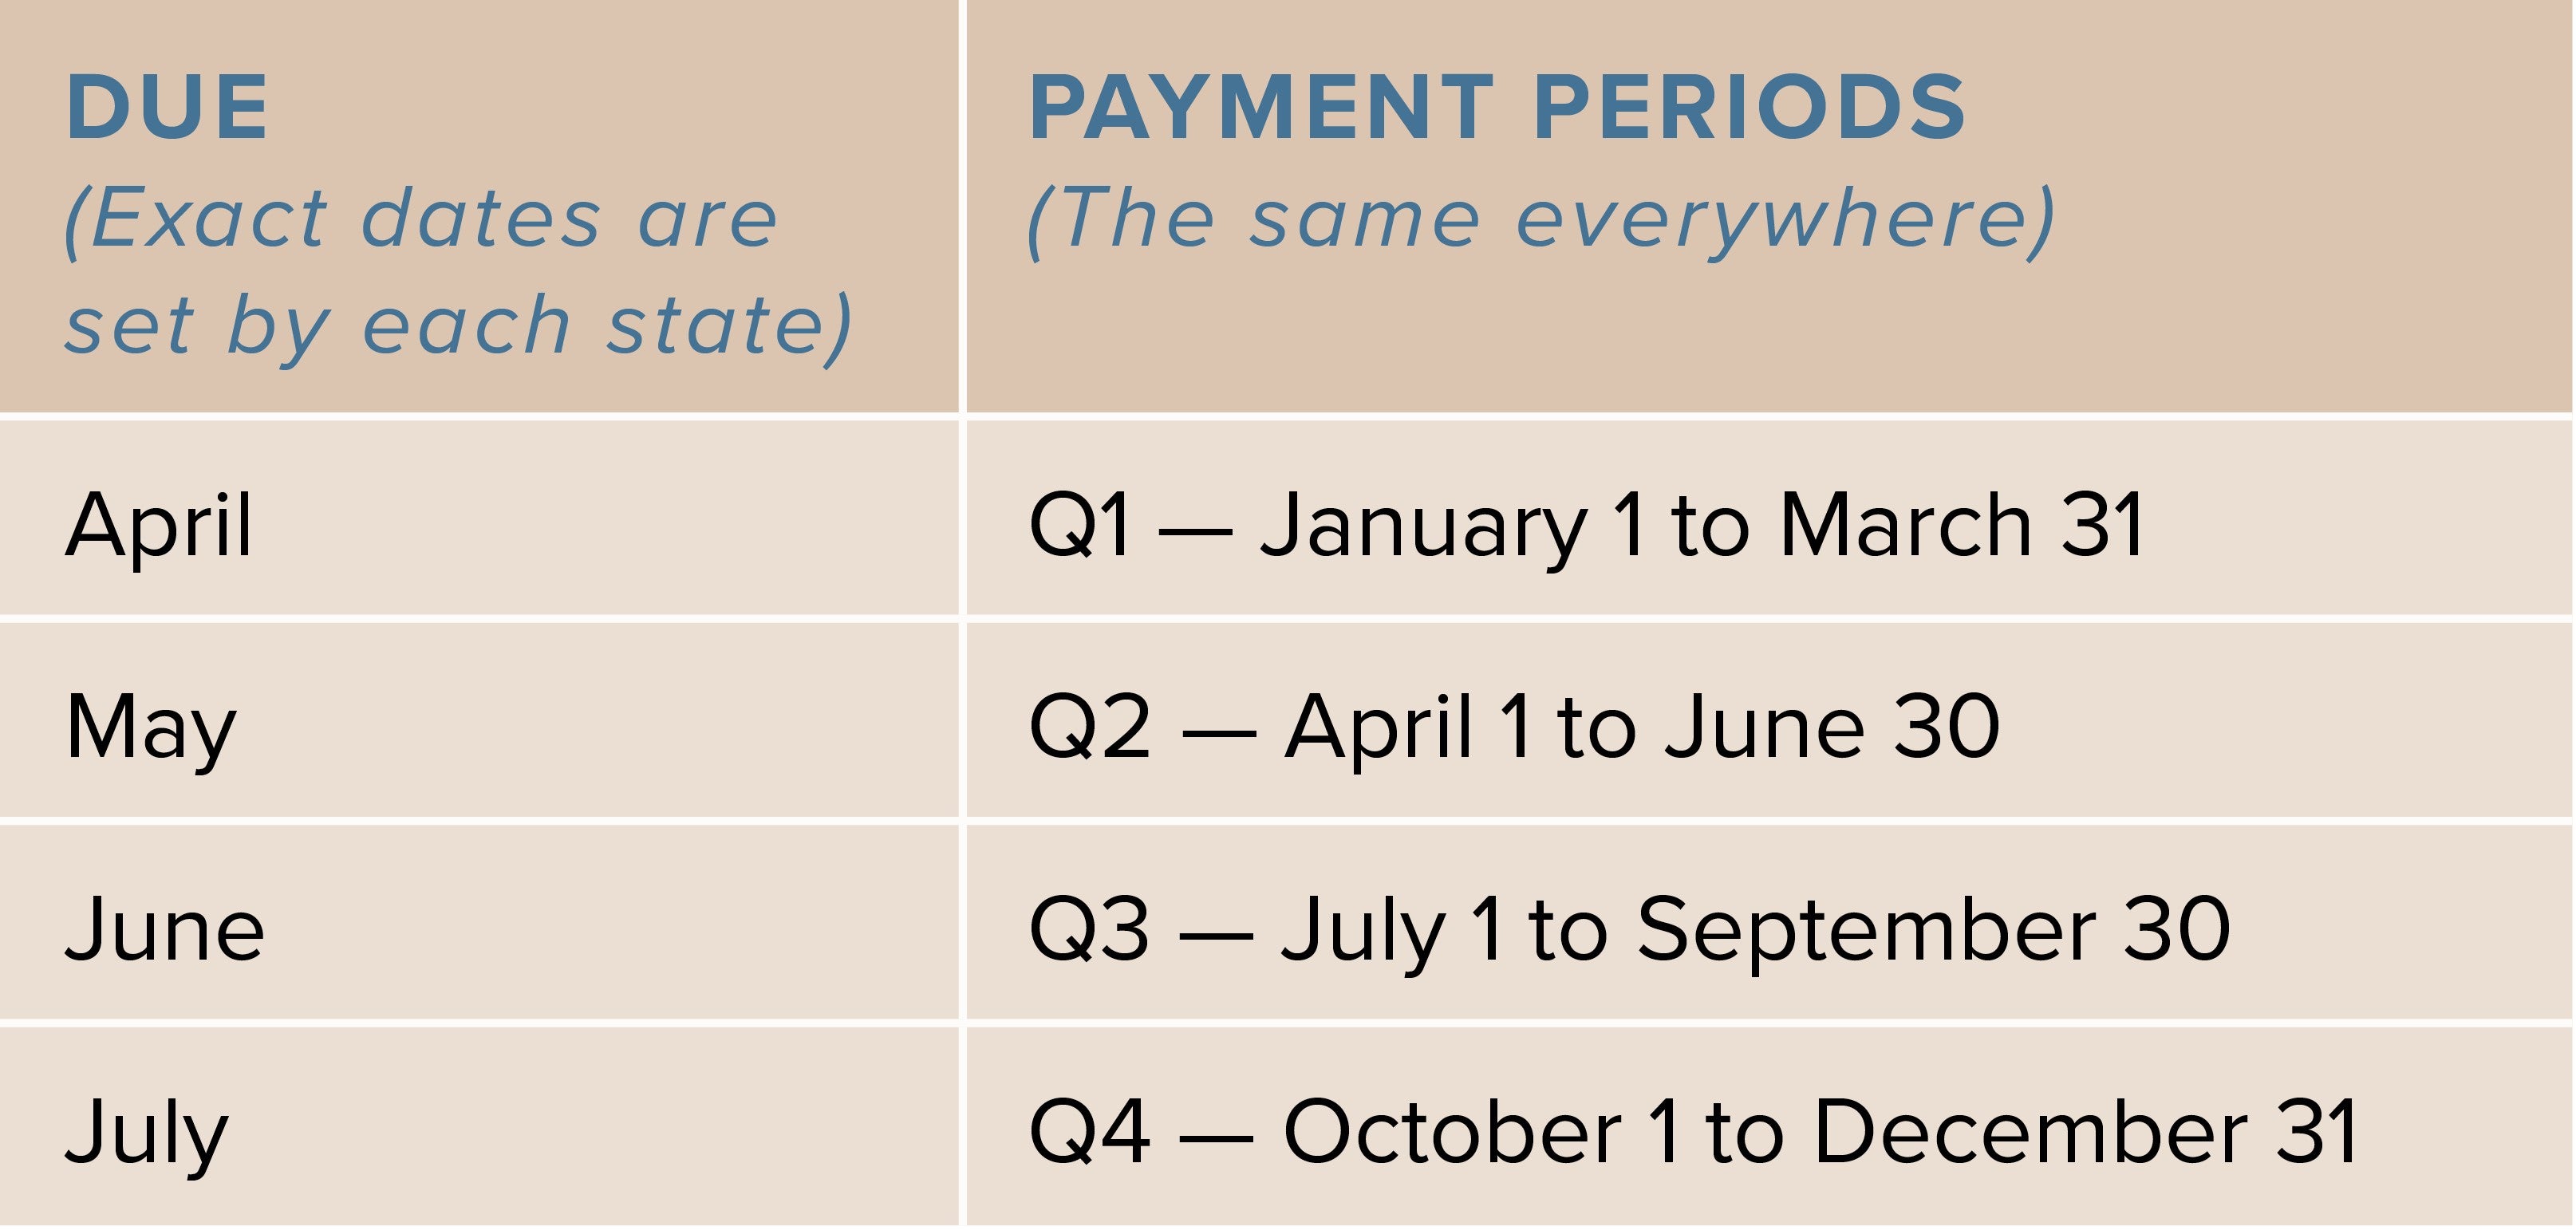 Repayment period for stocks. Pay dues